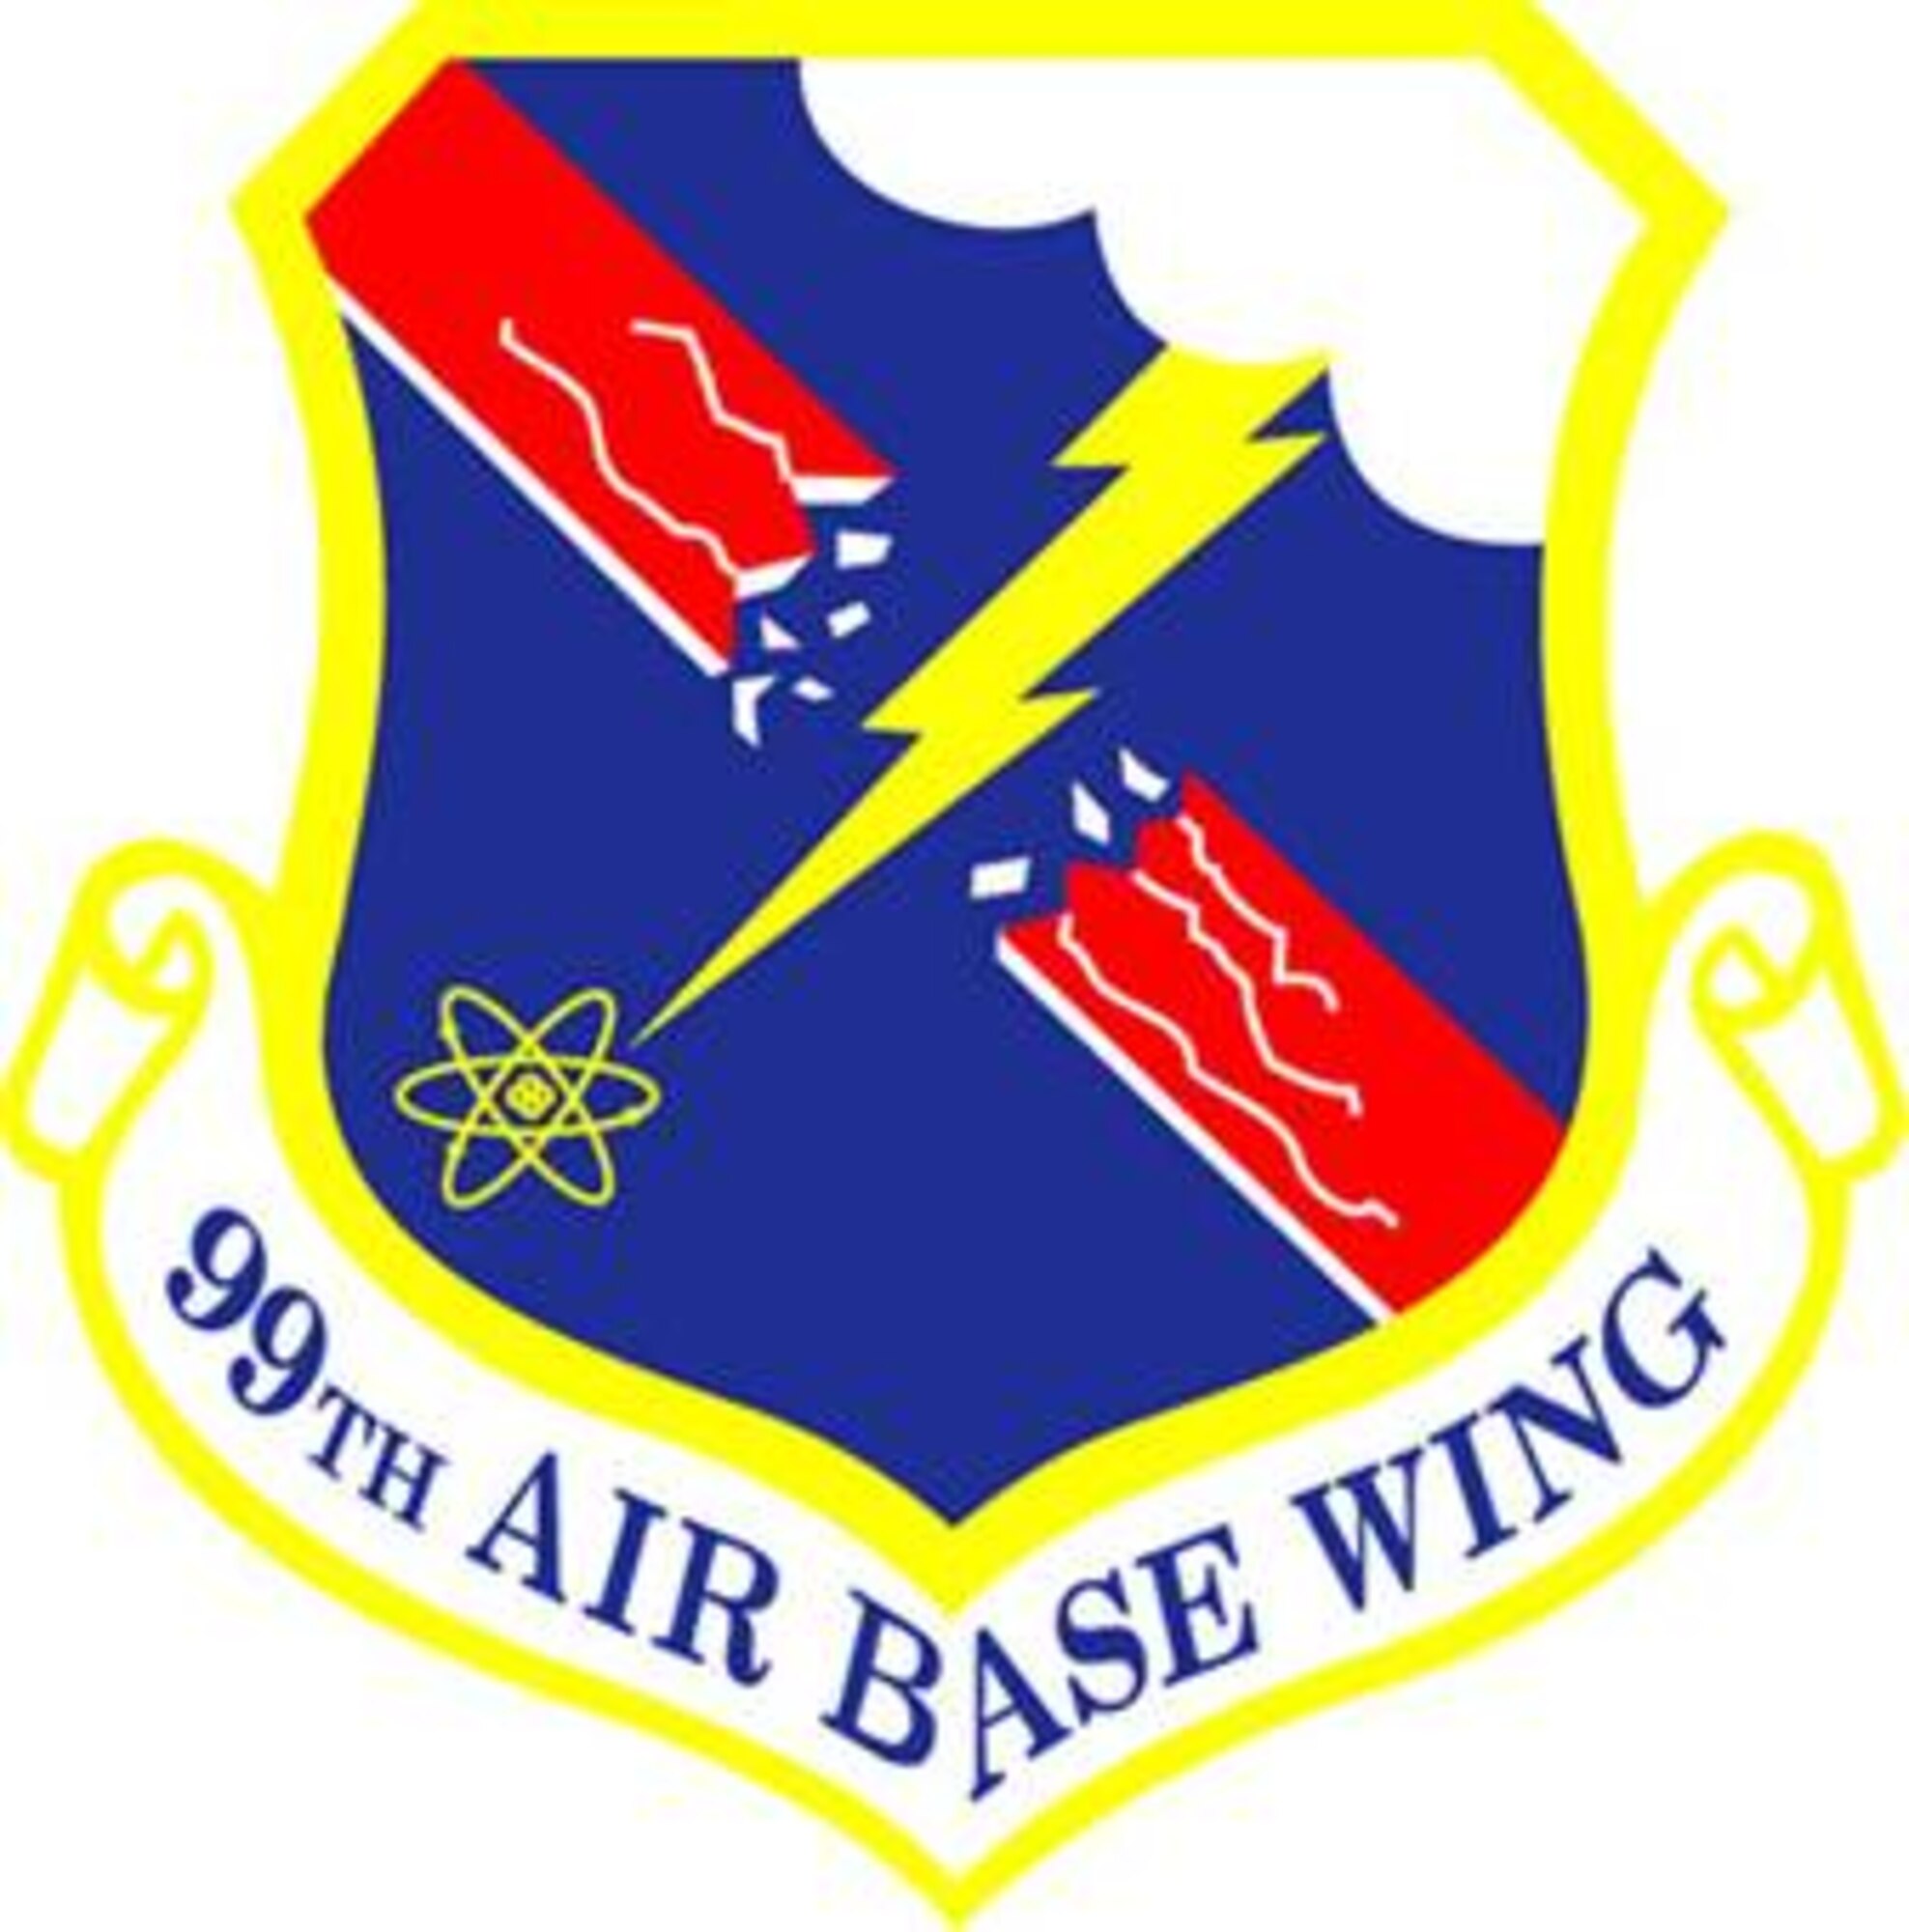 99th Air Base Wing patch design